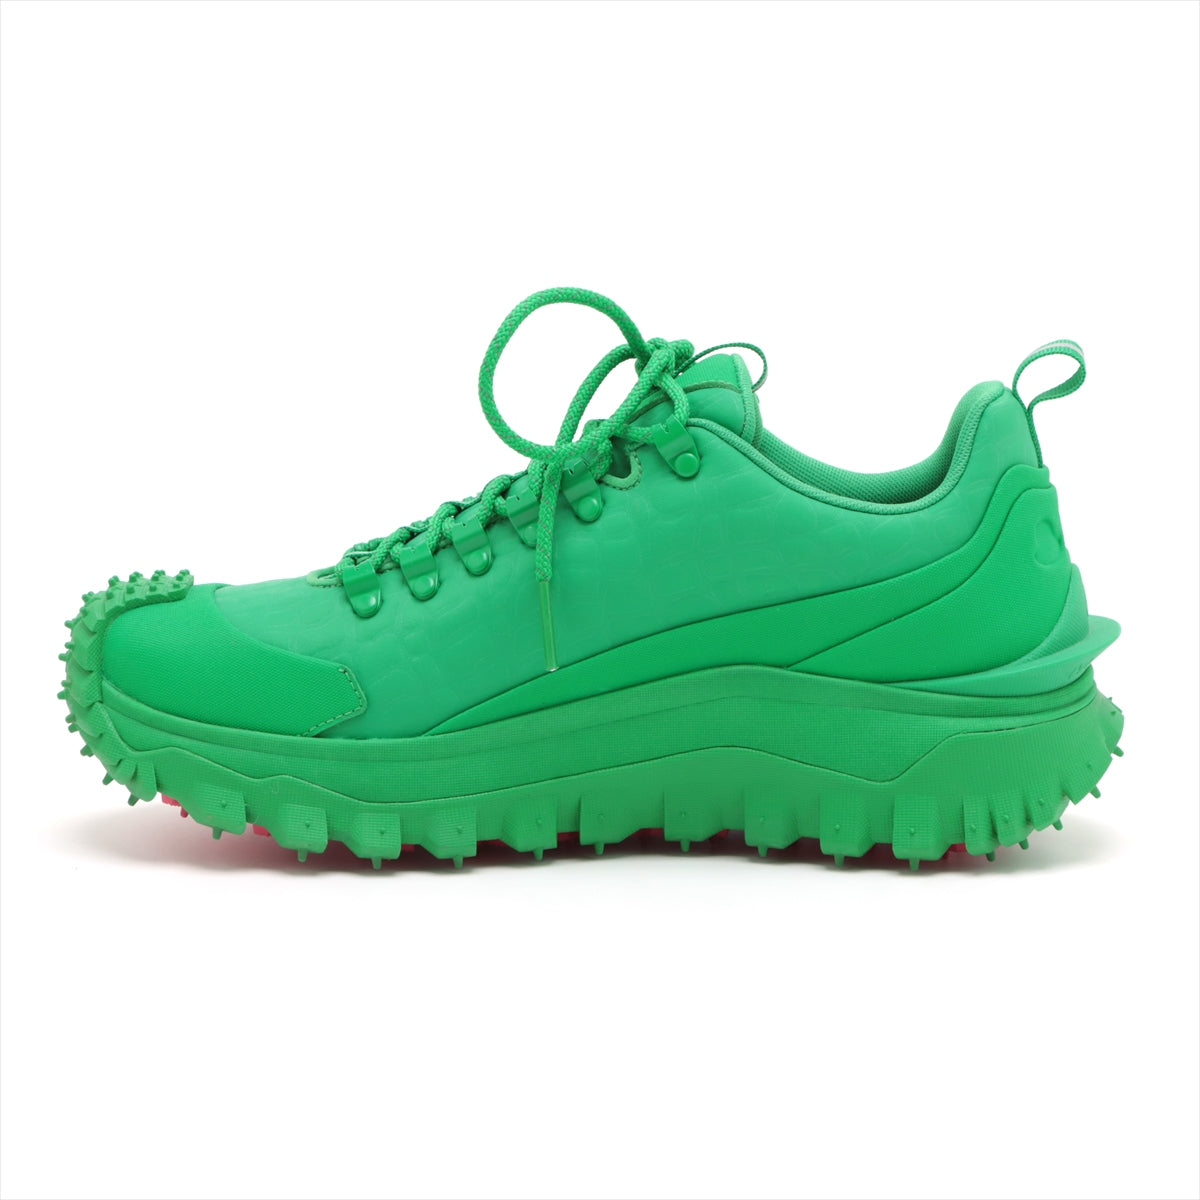 Moncler Genius 1952 Fabric Sneakers 43.5 Men's Green TRAILGRIP Is there a replacement string